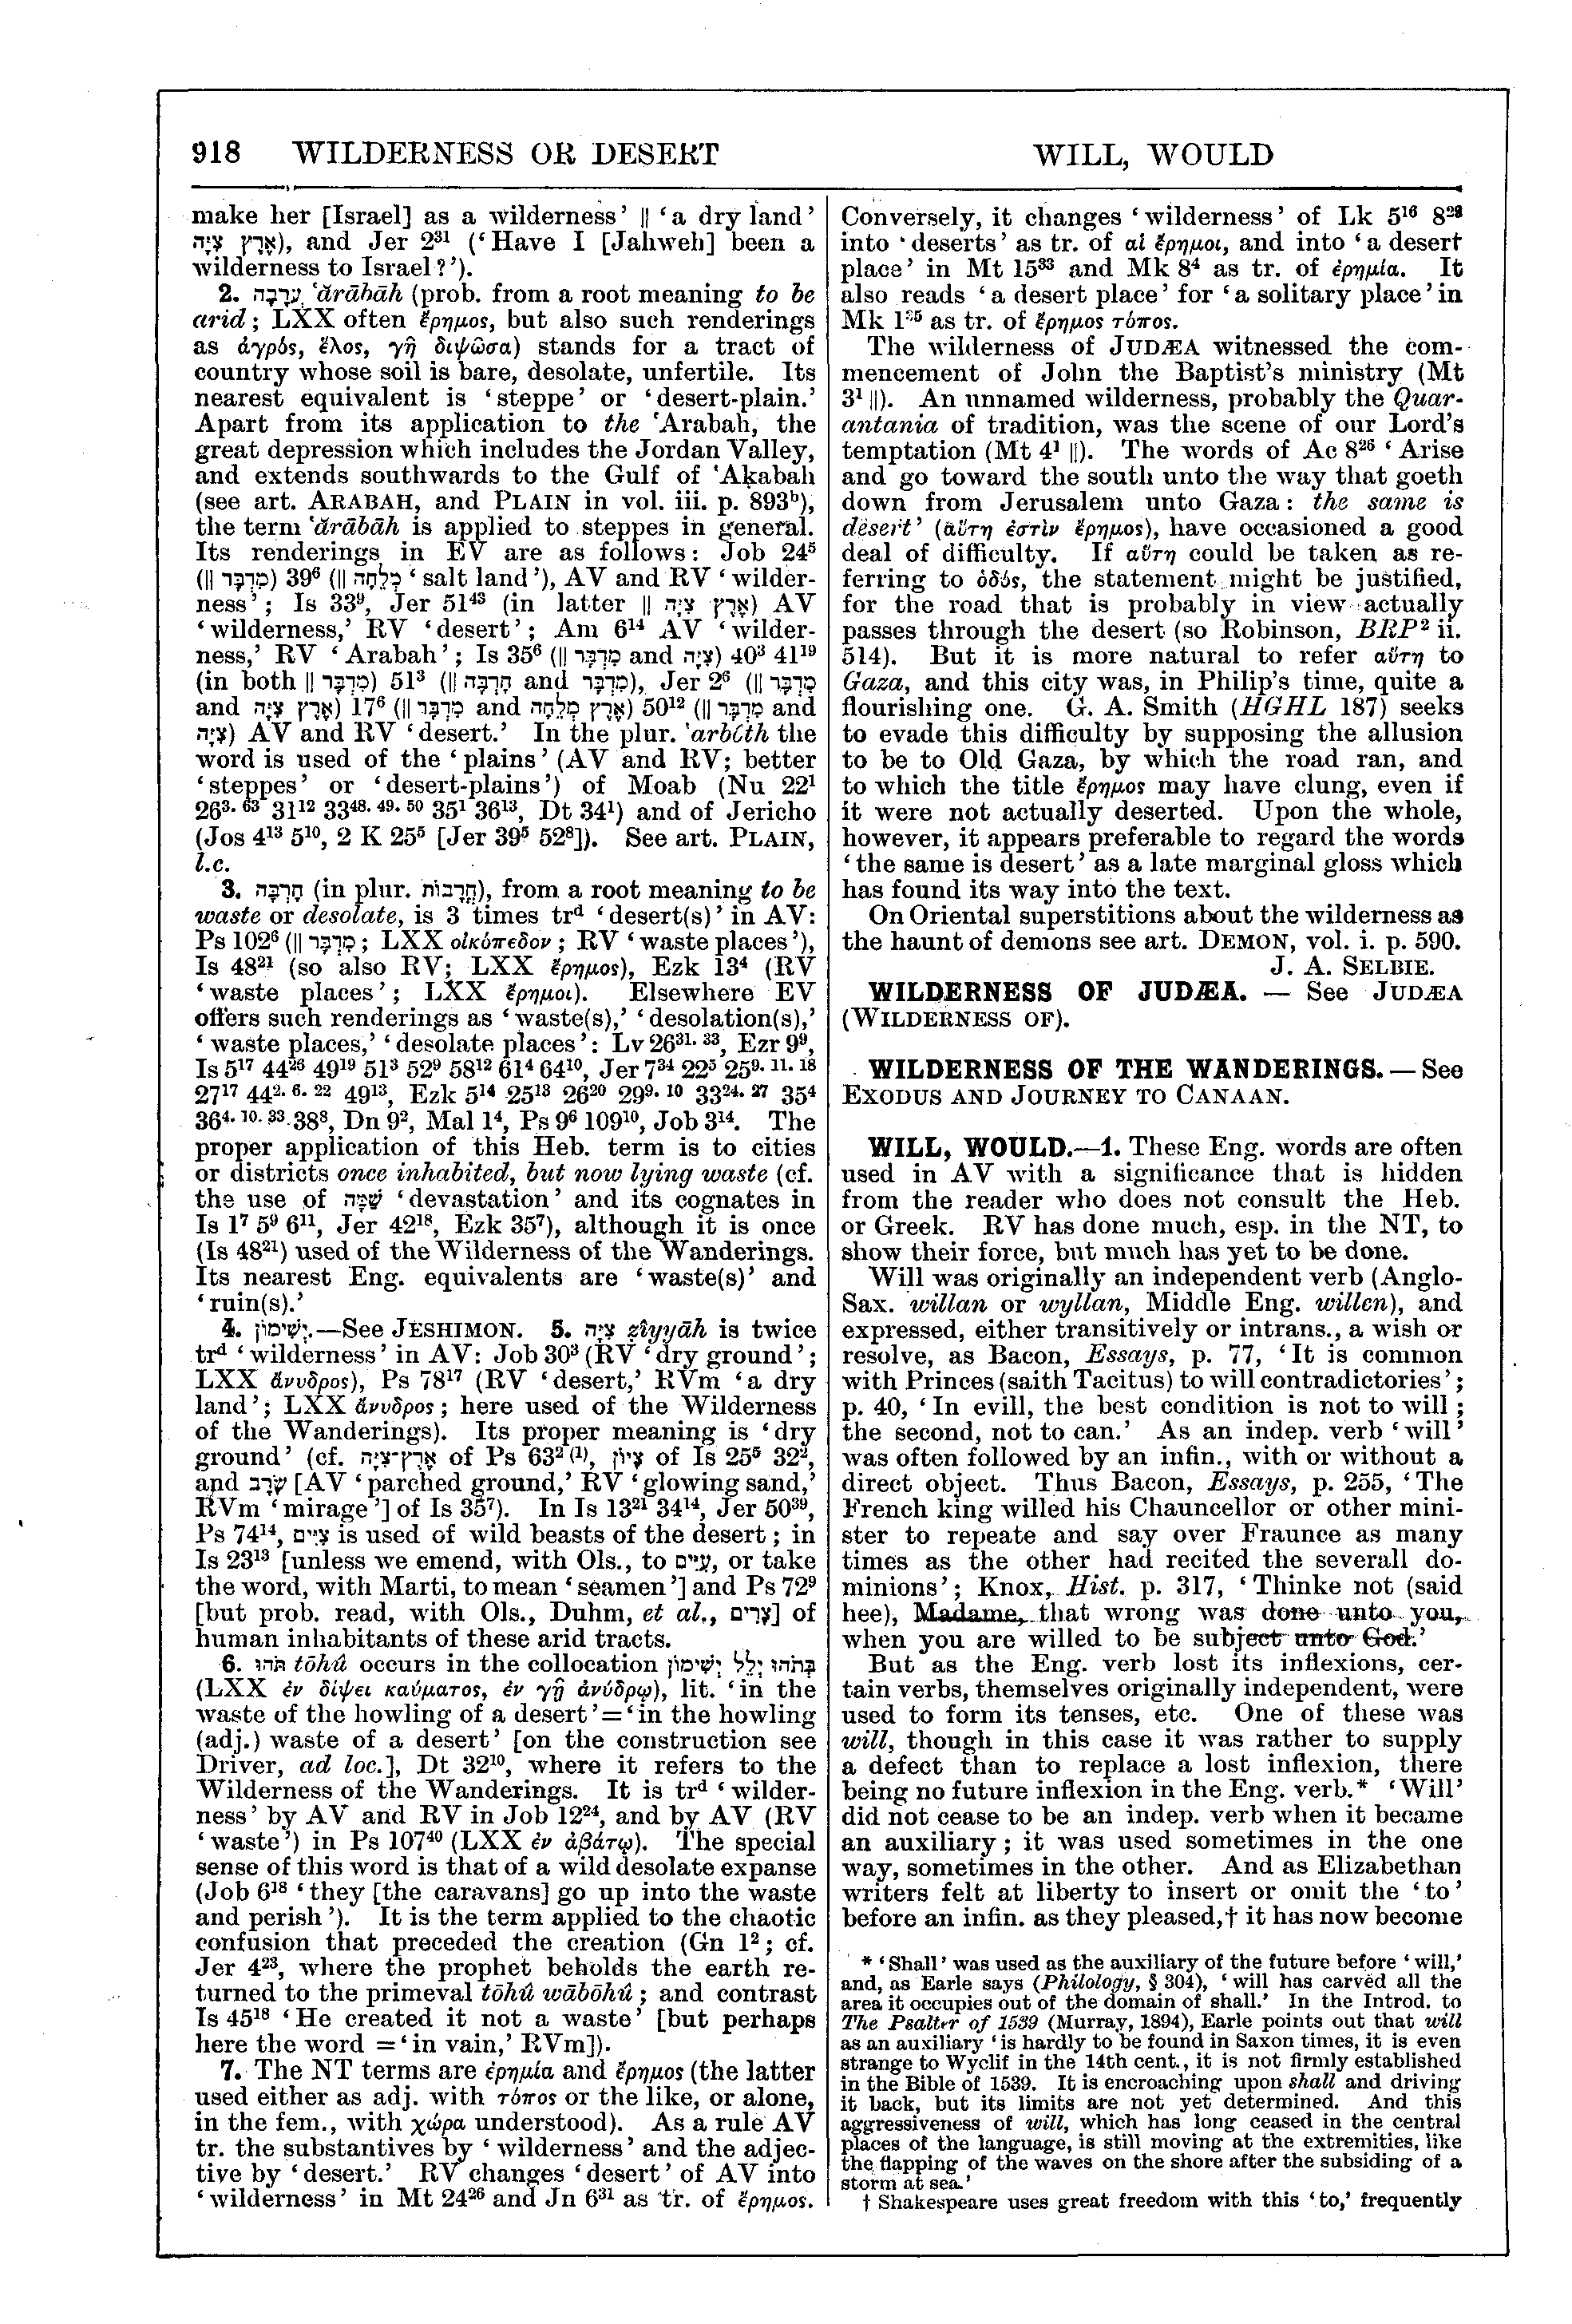 Image of page 918